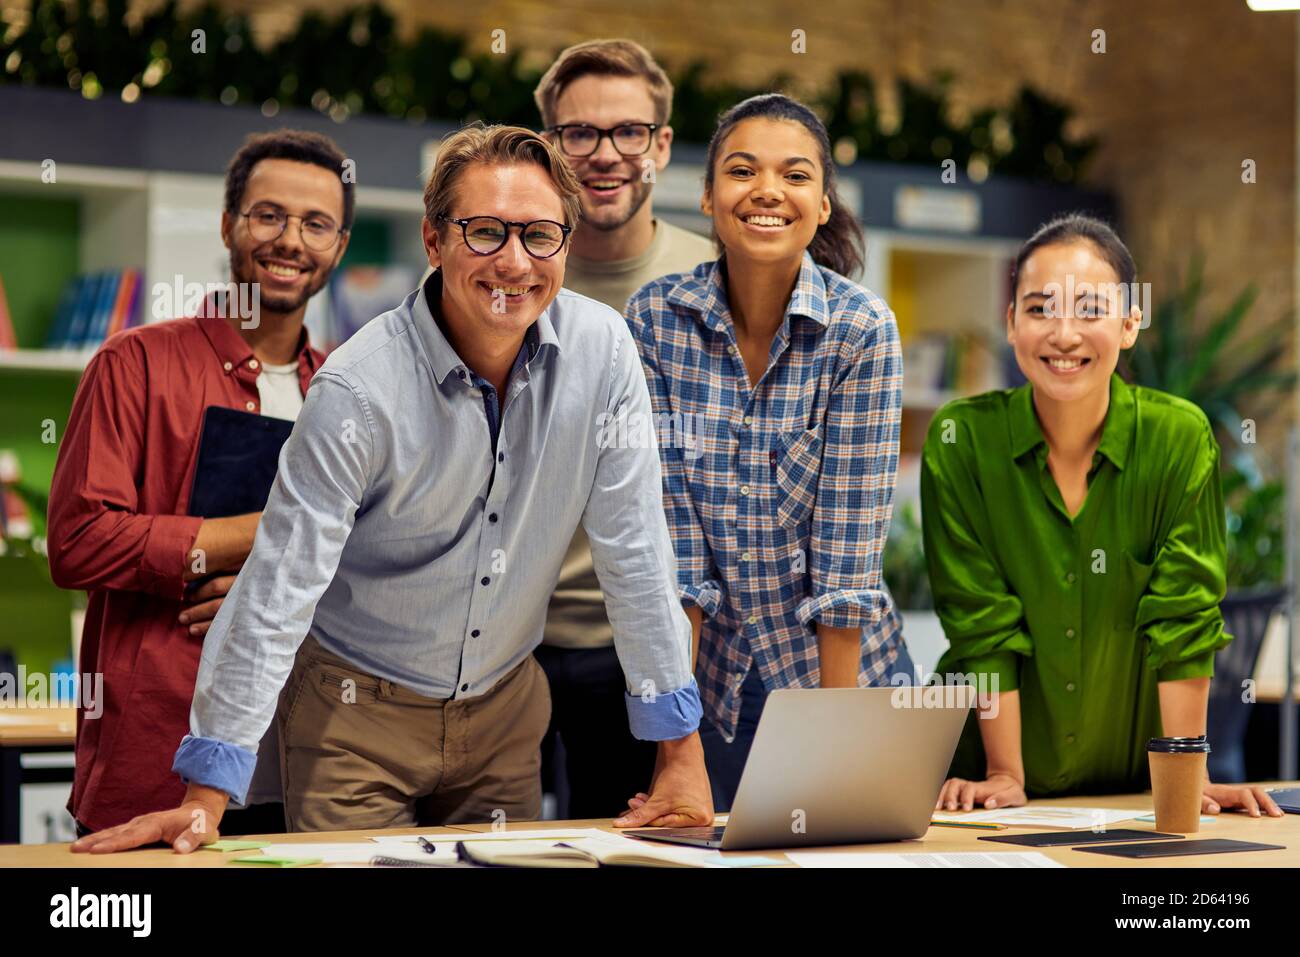 Working as a team. Group of young successful multi ethnic business team looking at camera and smiling while having a meeting in the modern office and coworking space. Business, teamwork, cooperation Stock Photo